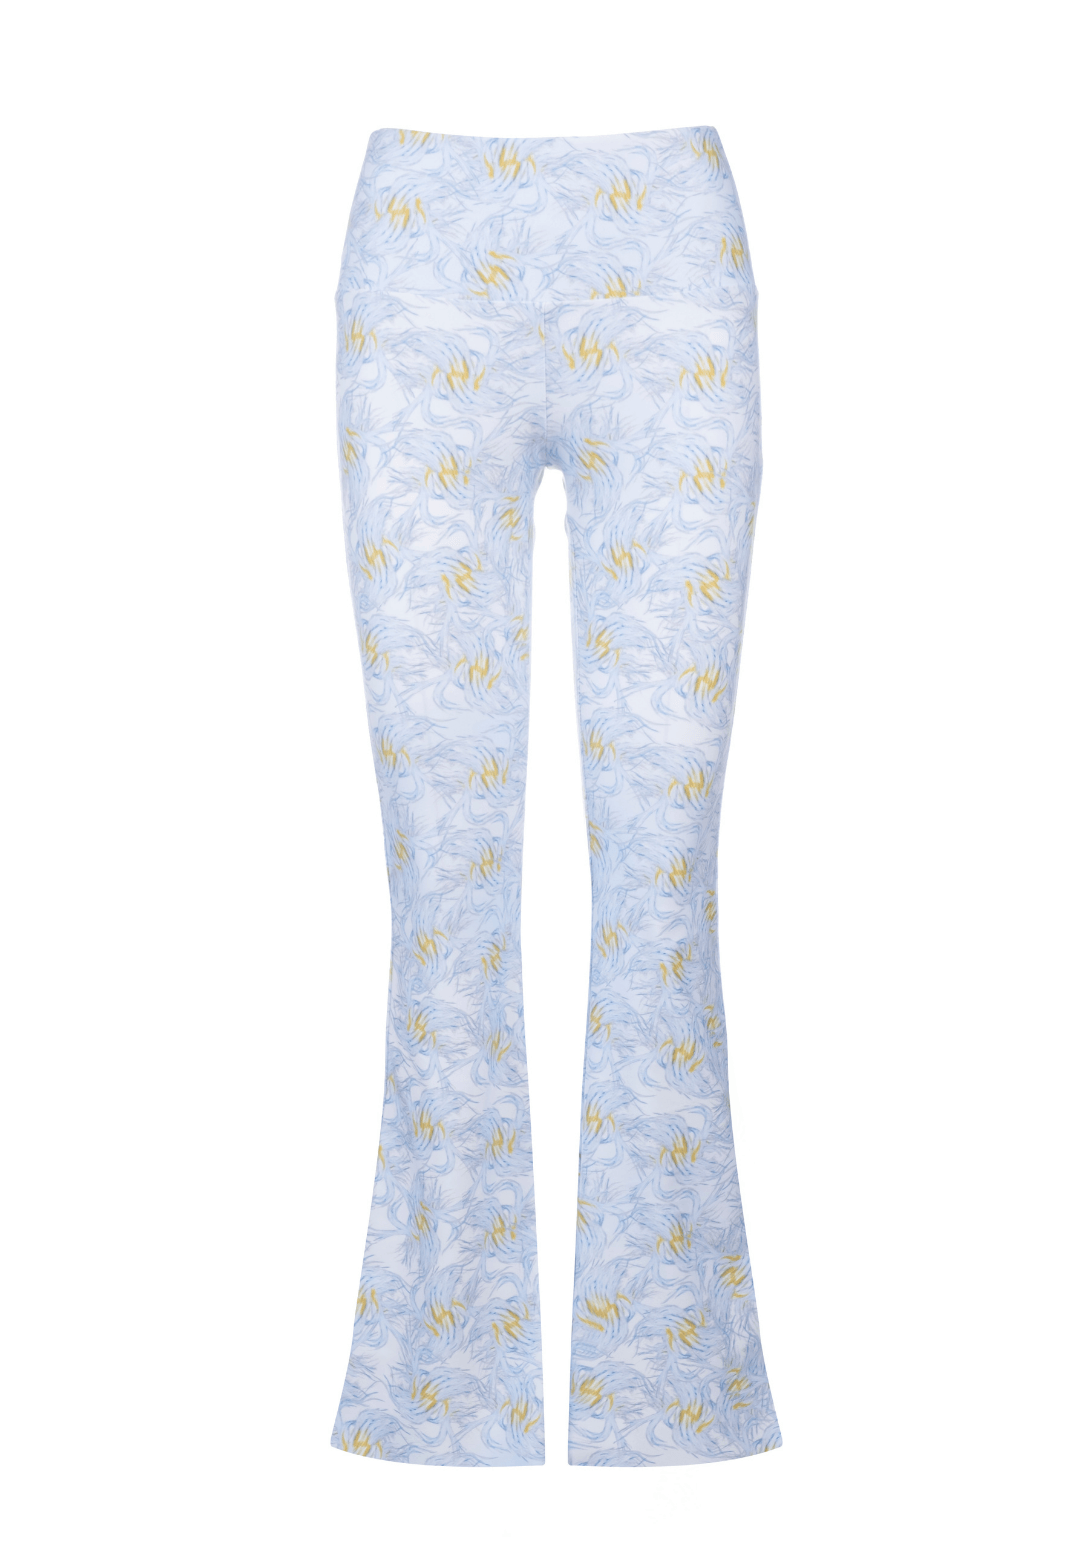 yellow and blue feather printed stretch knit pants